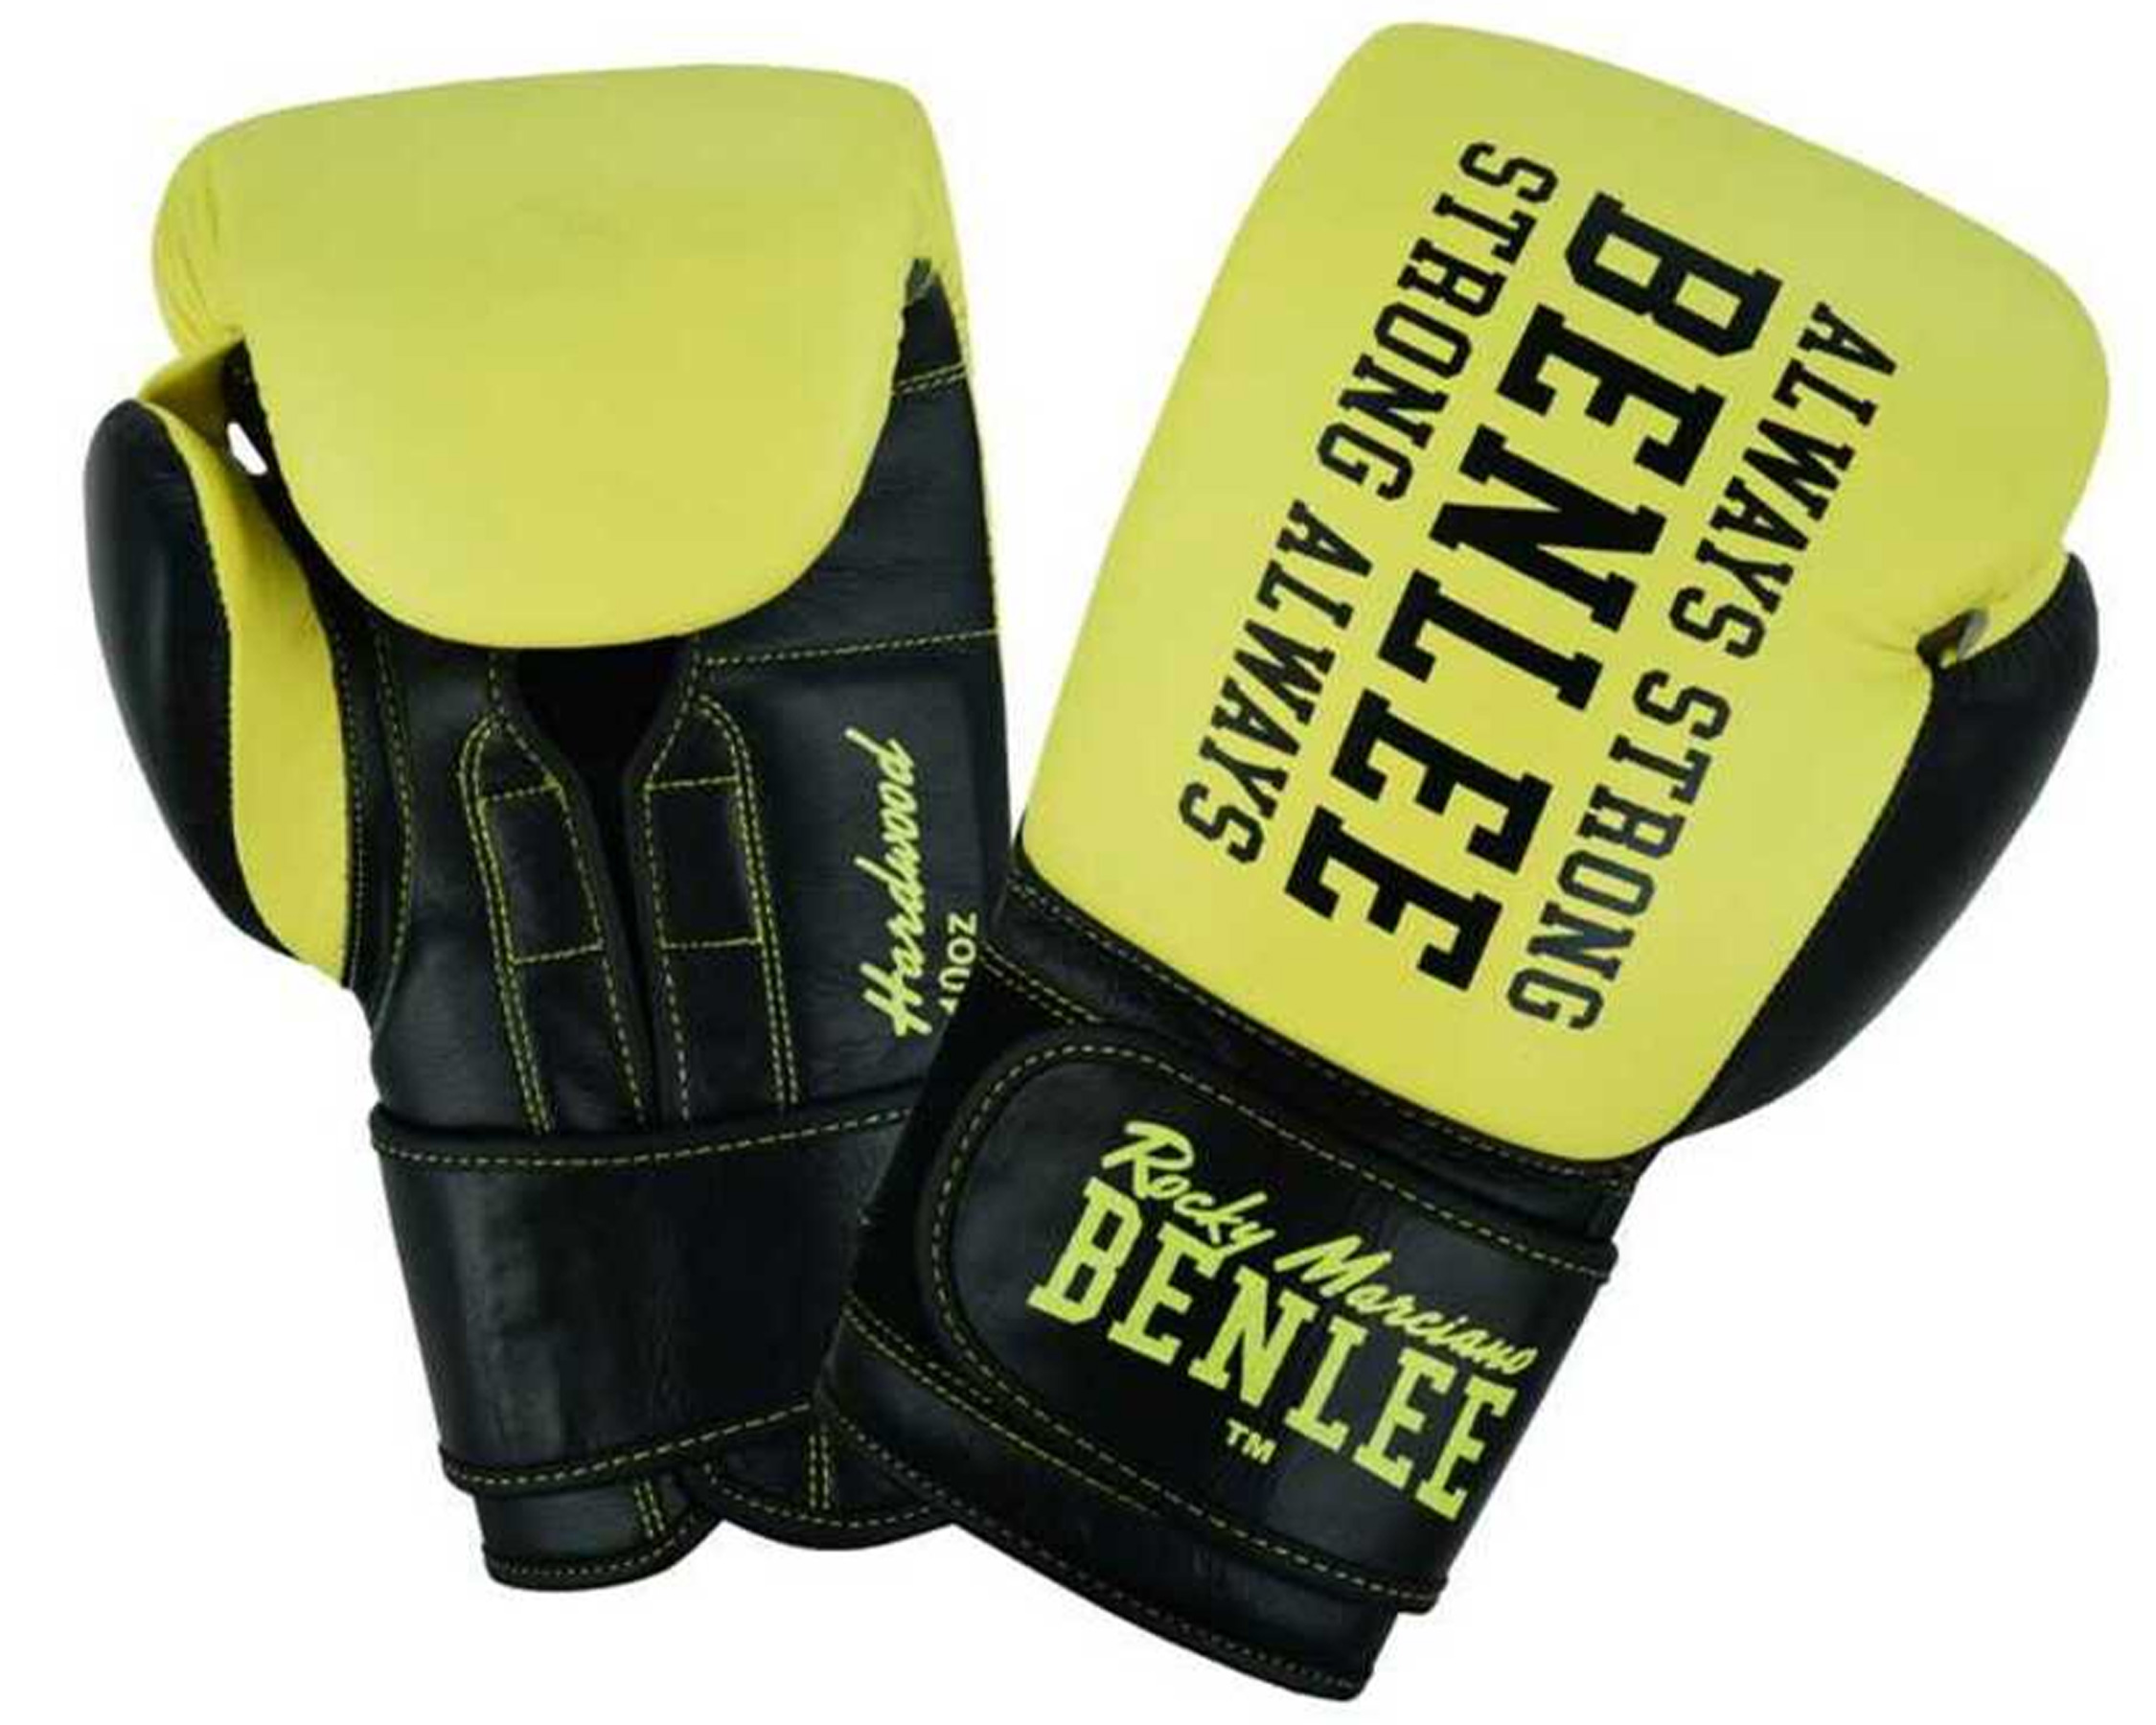 BenLee leather boxing gloves Hardwood - Boxing gloves, training gloves and sparring  gloves - BenLee boxing equipment and sportswear